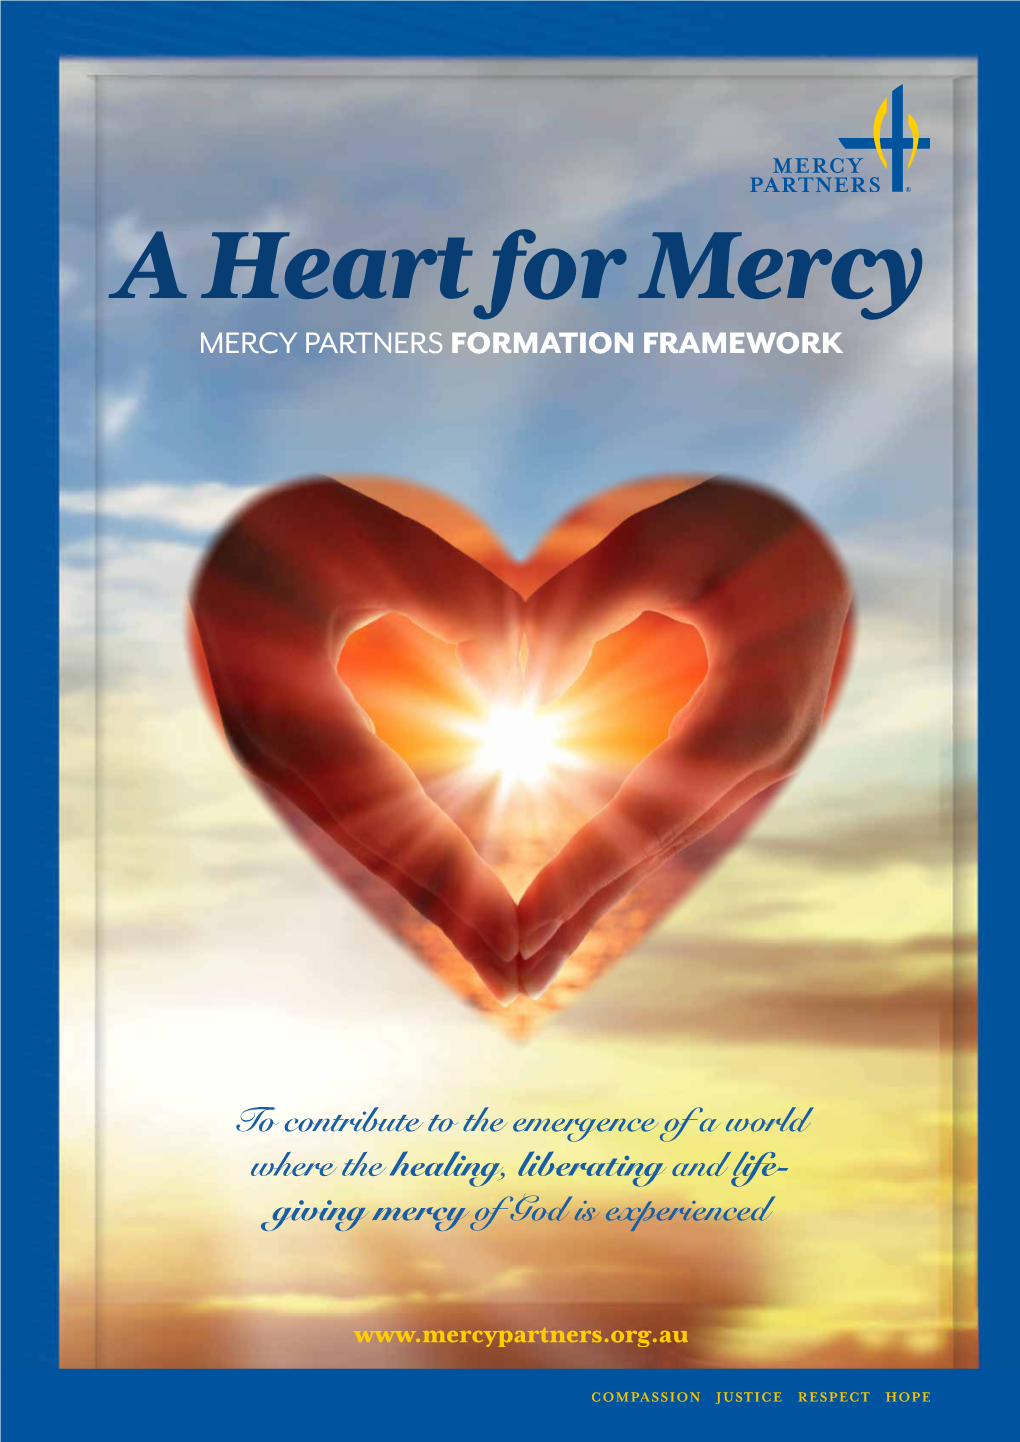 A Heart for Mercy MERCY PARTNERS FORMATION FRAMEWORK